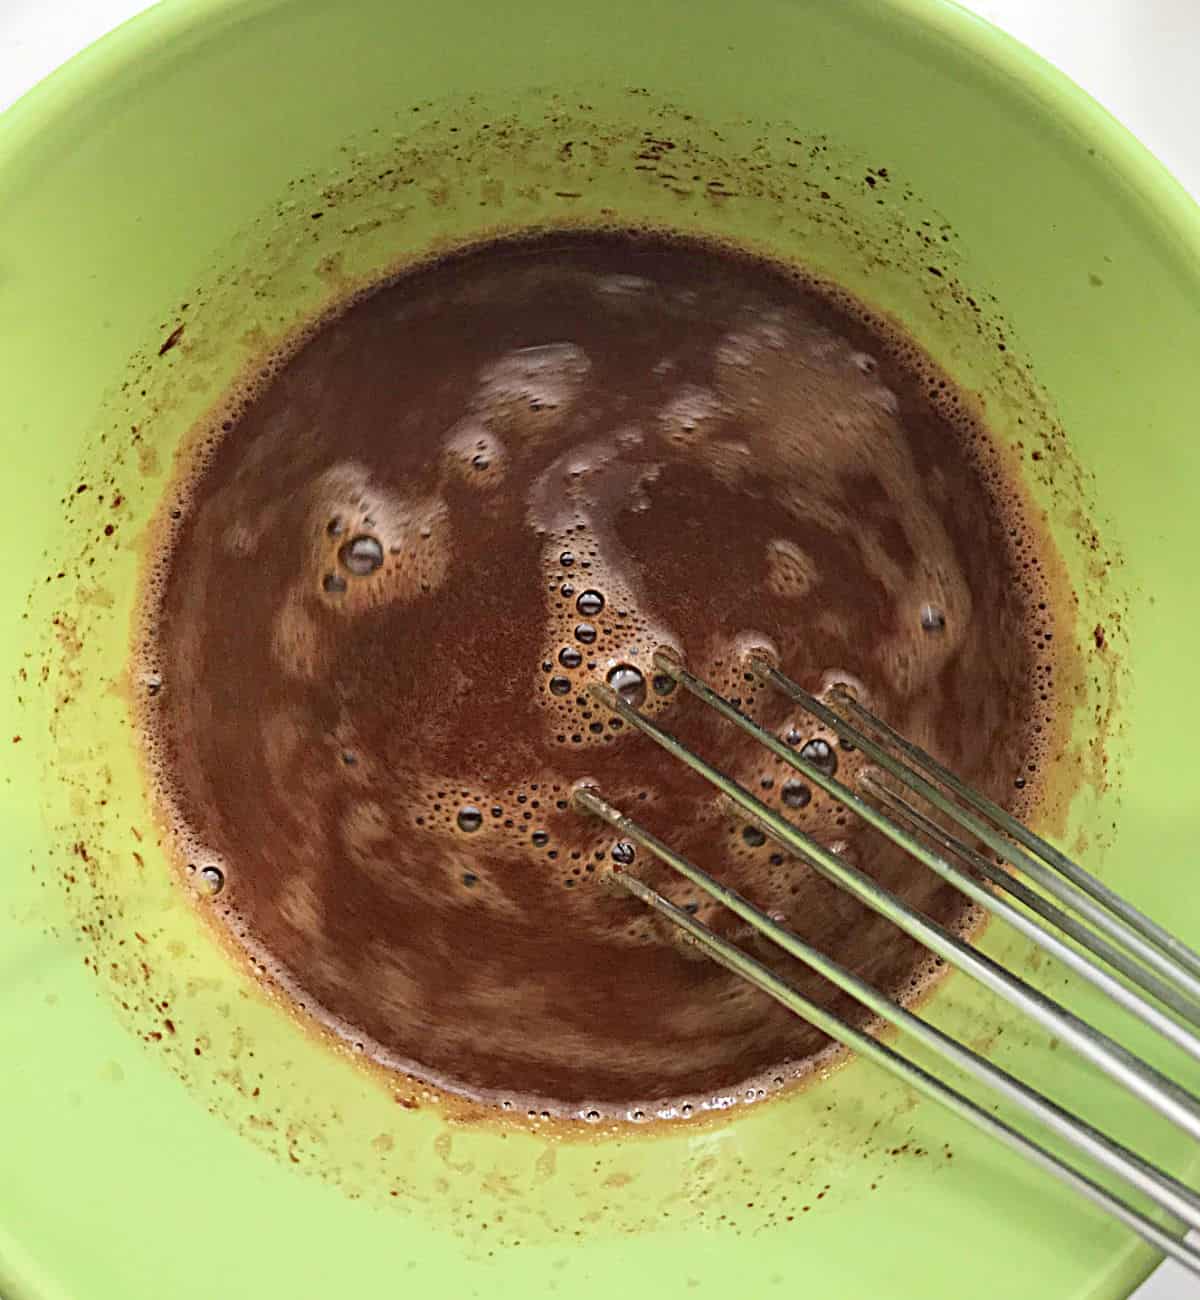 Green bowl with liquid chocolate mixture and whisk